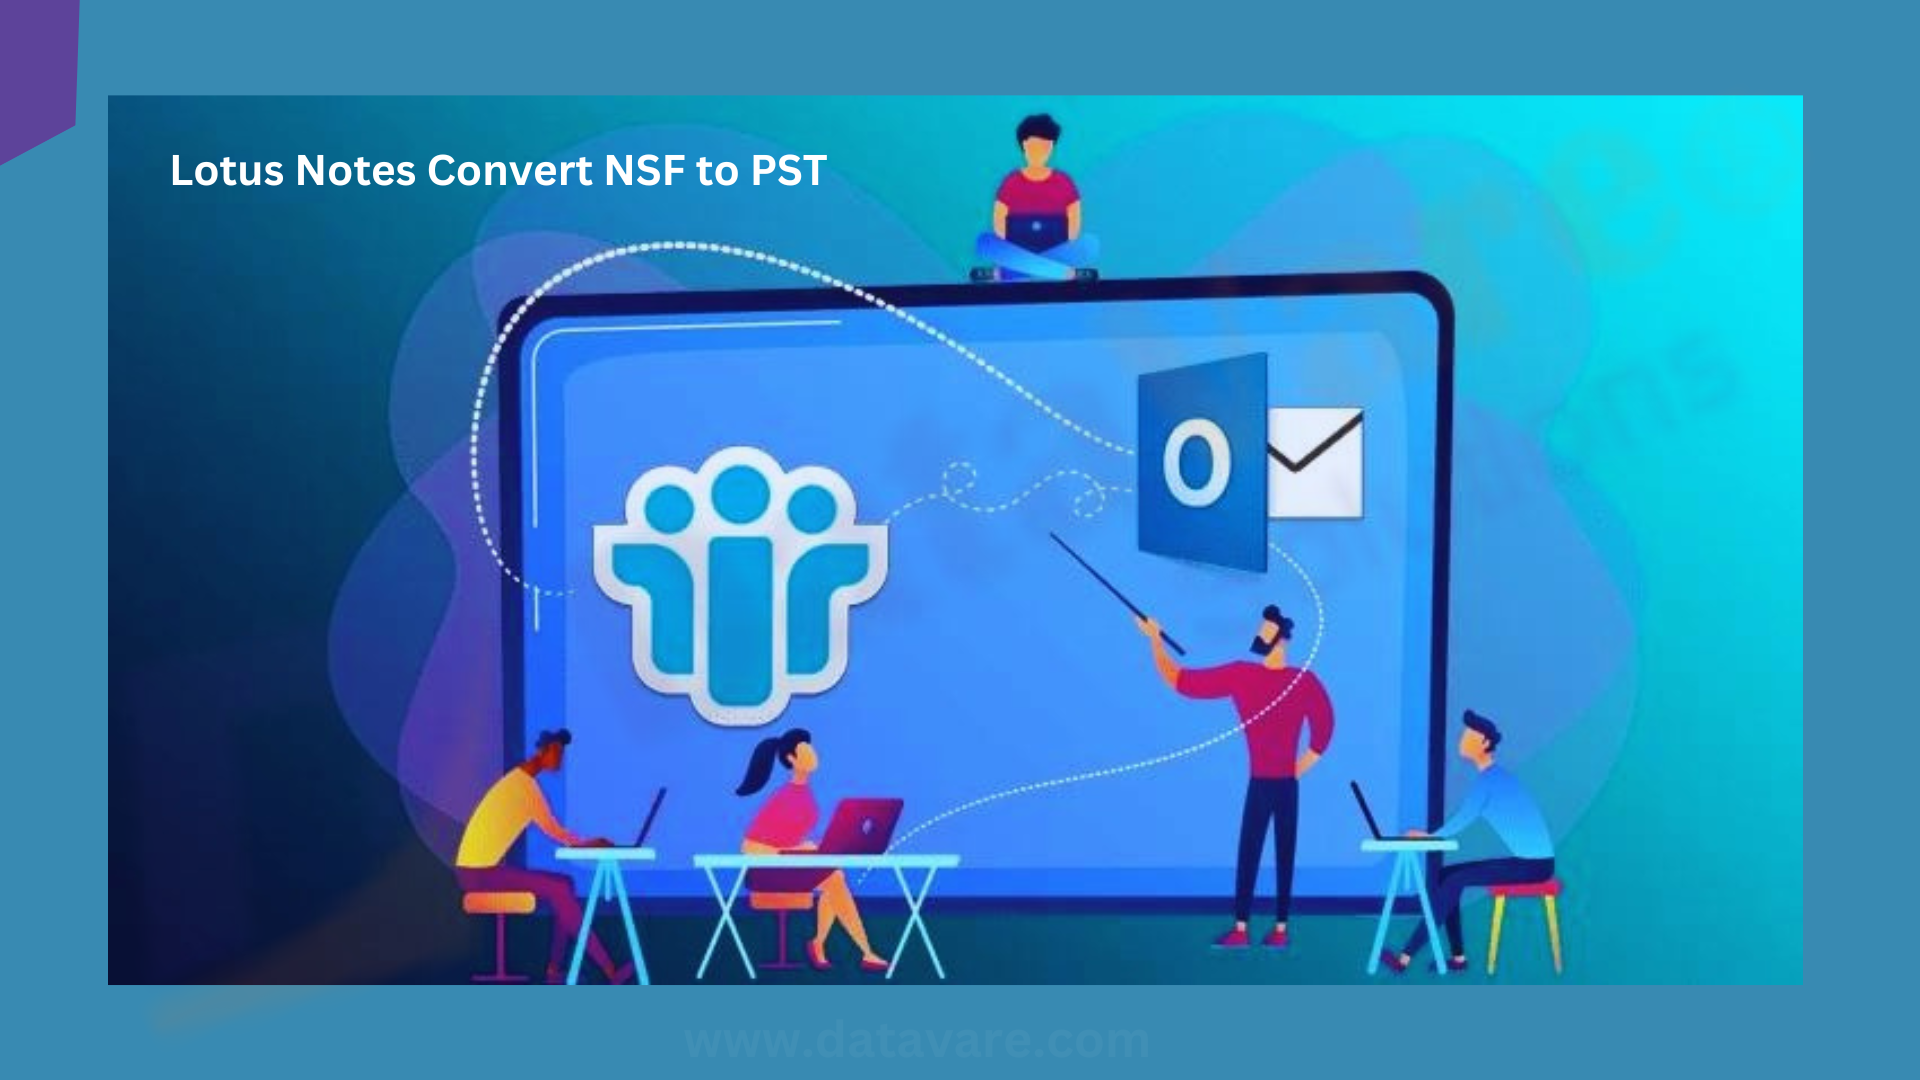 Lotus Notes Convert NSF to PST